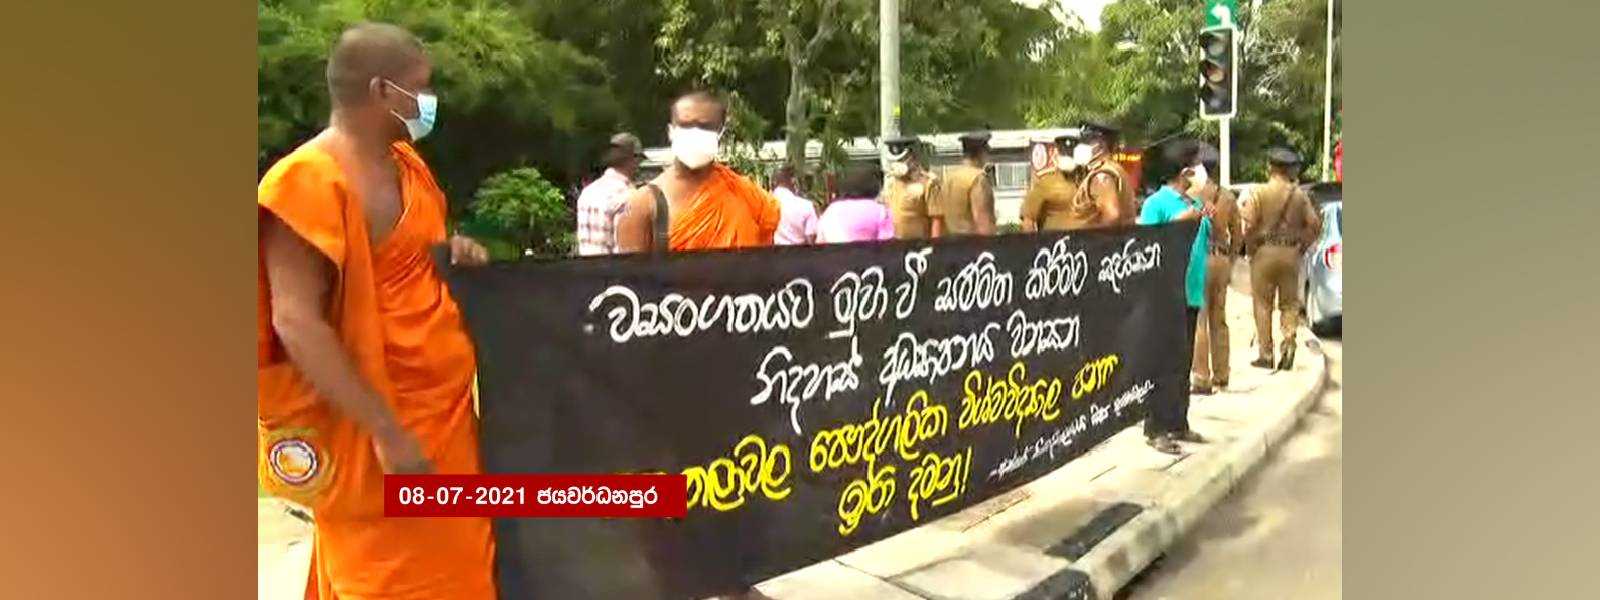 31 arrested for protesting near Parliament: Police